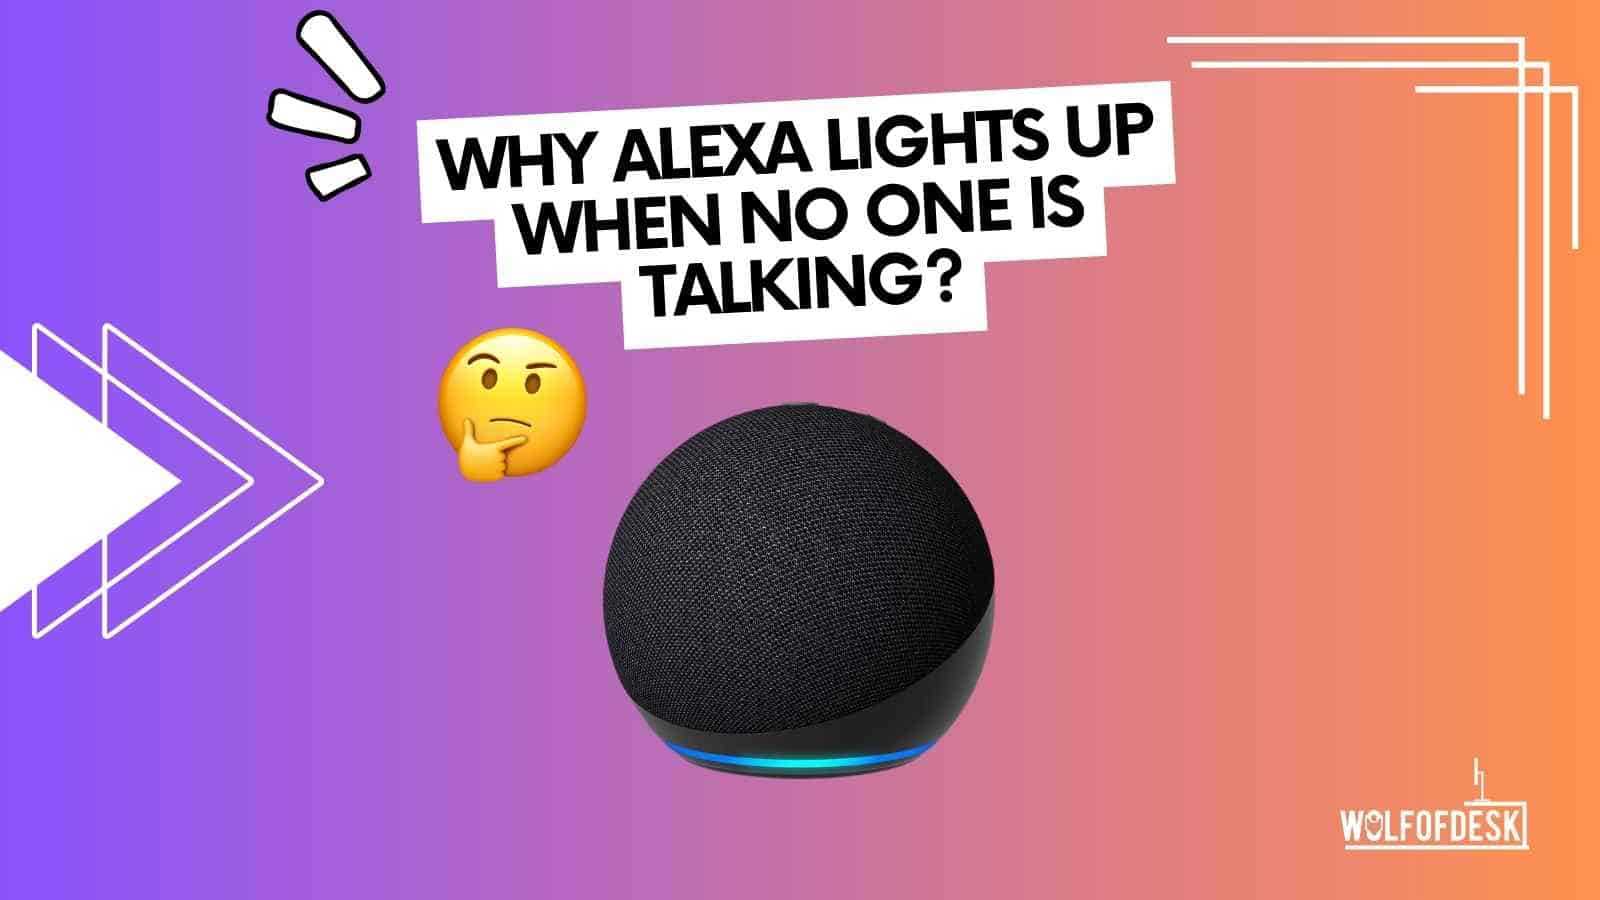 why did alexa just light up even thought I didn't say anything?